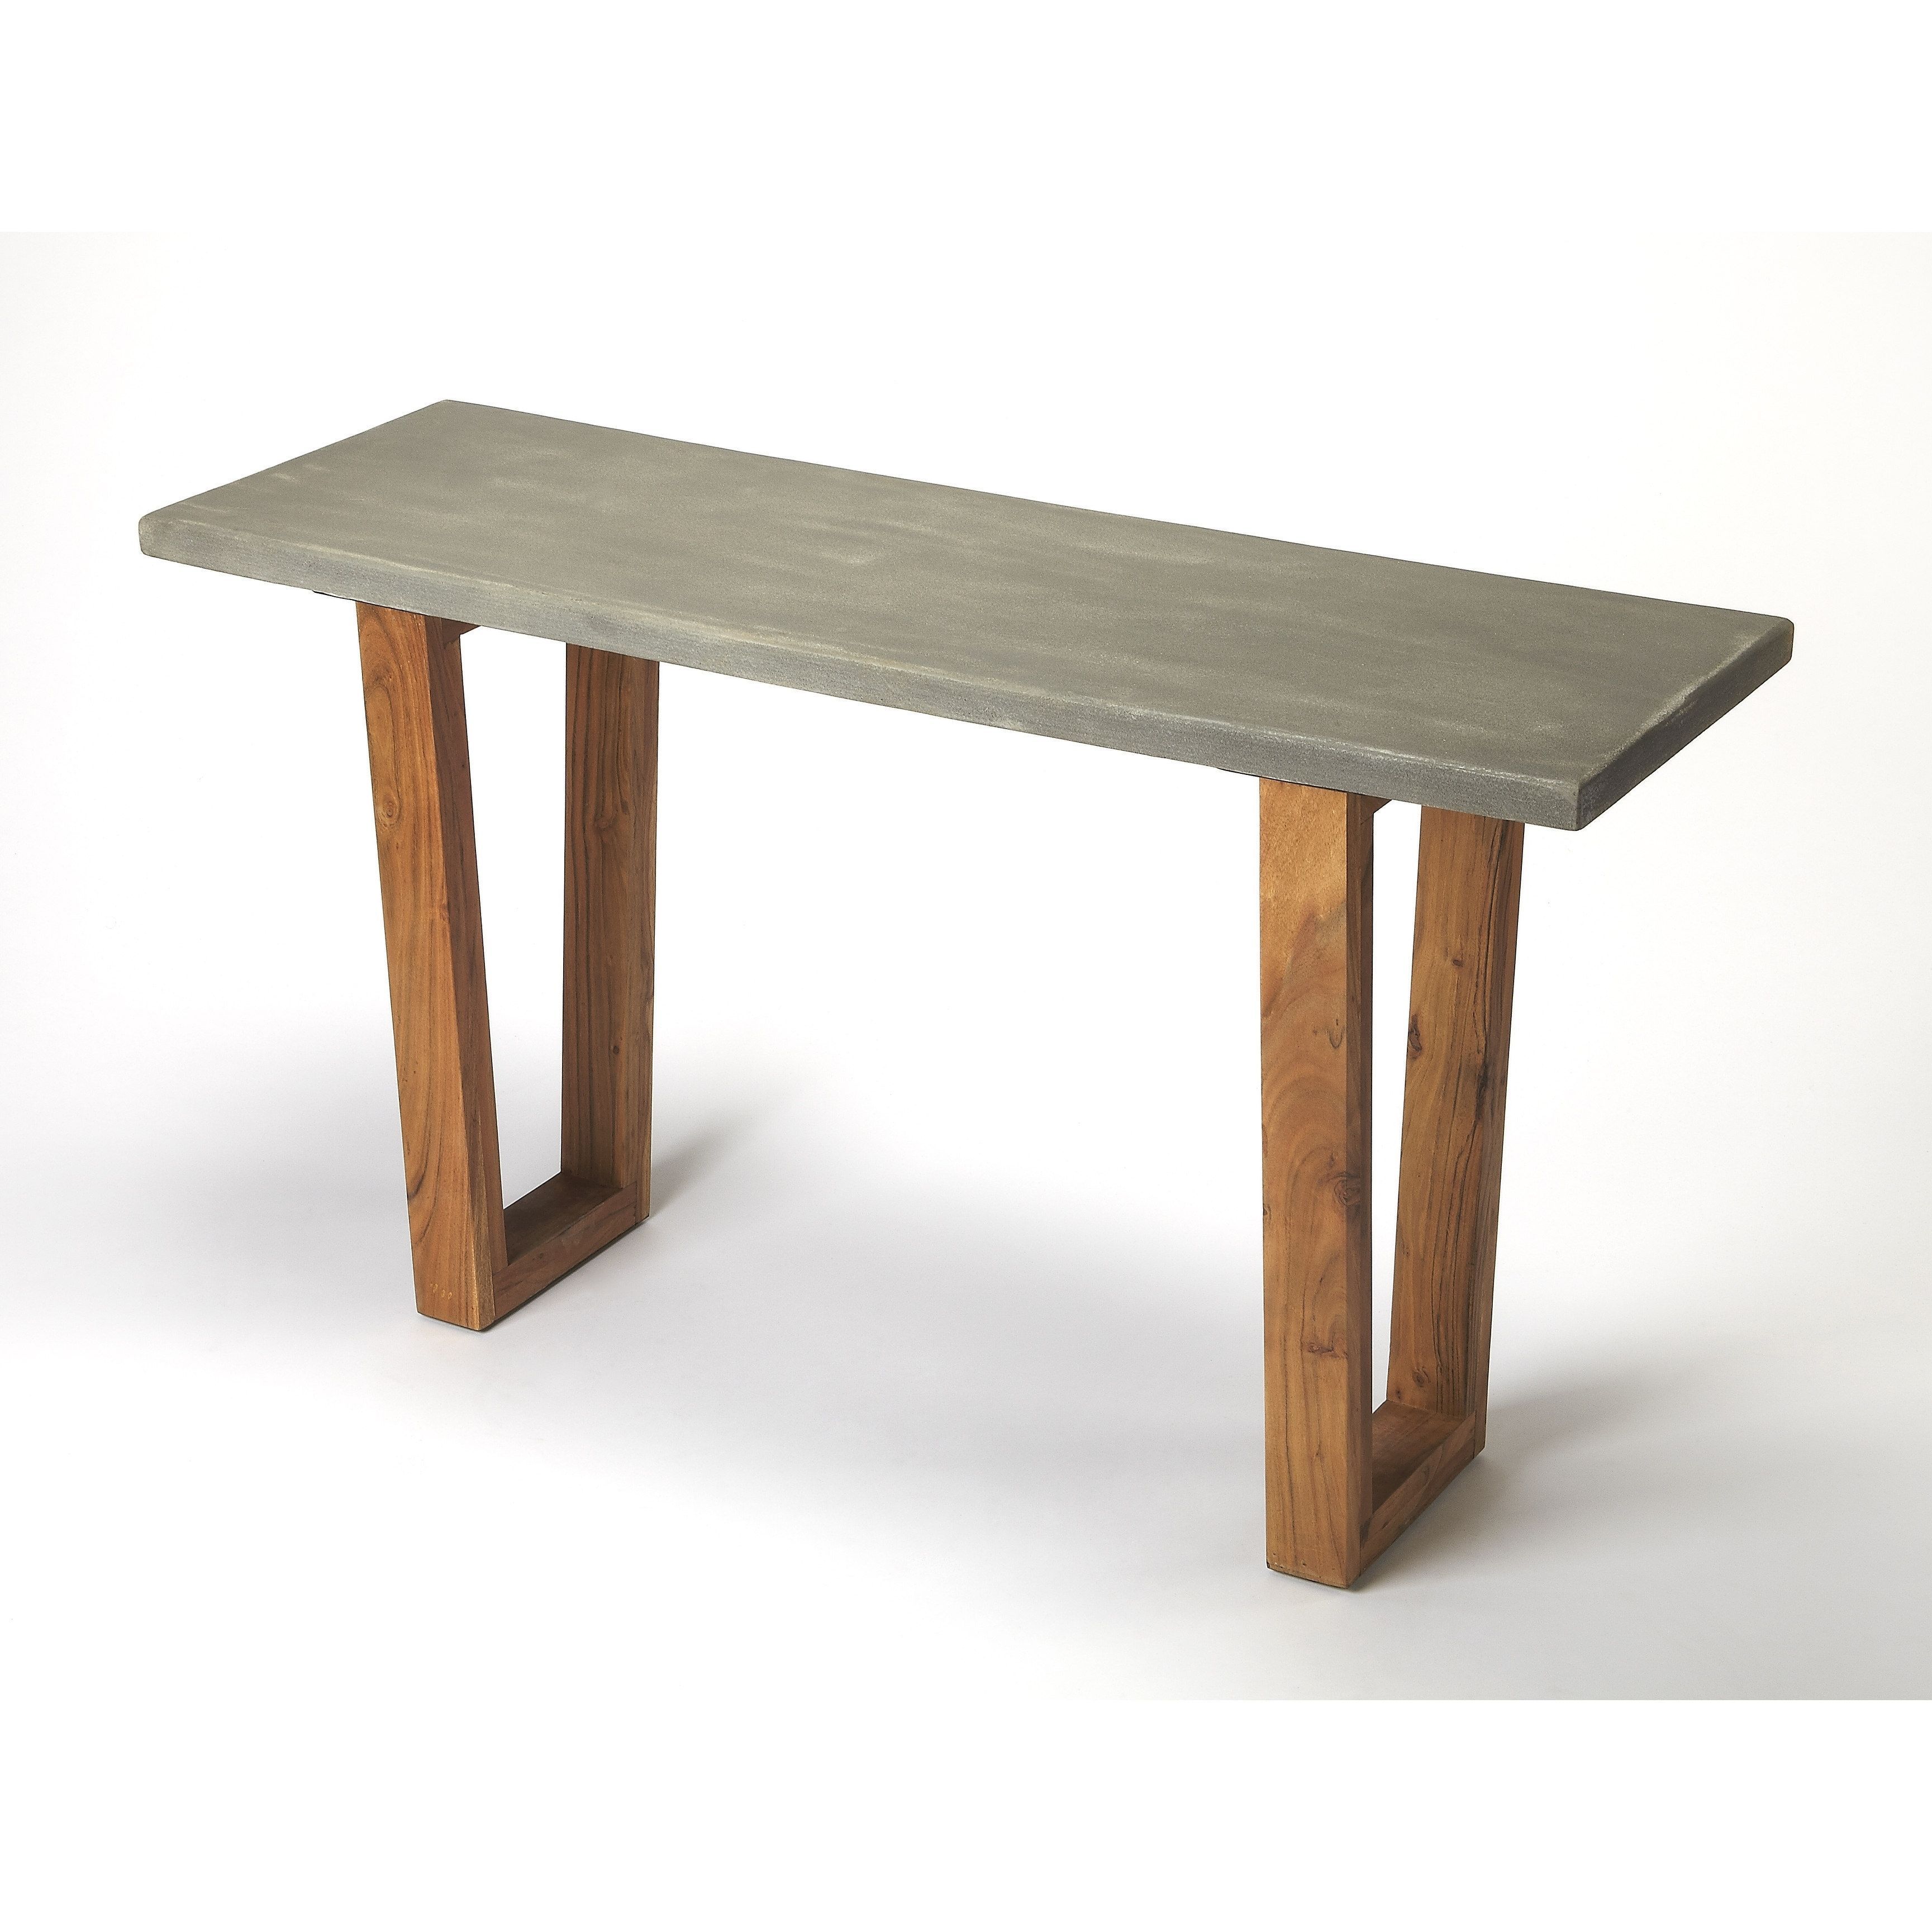 Butler Massey Concrete & Wood Console Table, Multi | Products For Yukon Natural Console Tables (View 15 of 30)